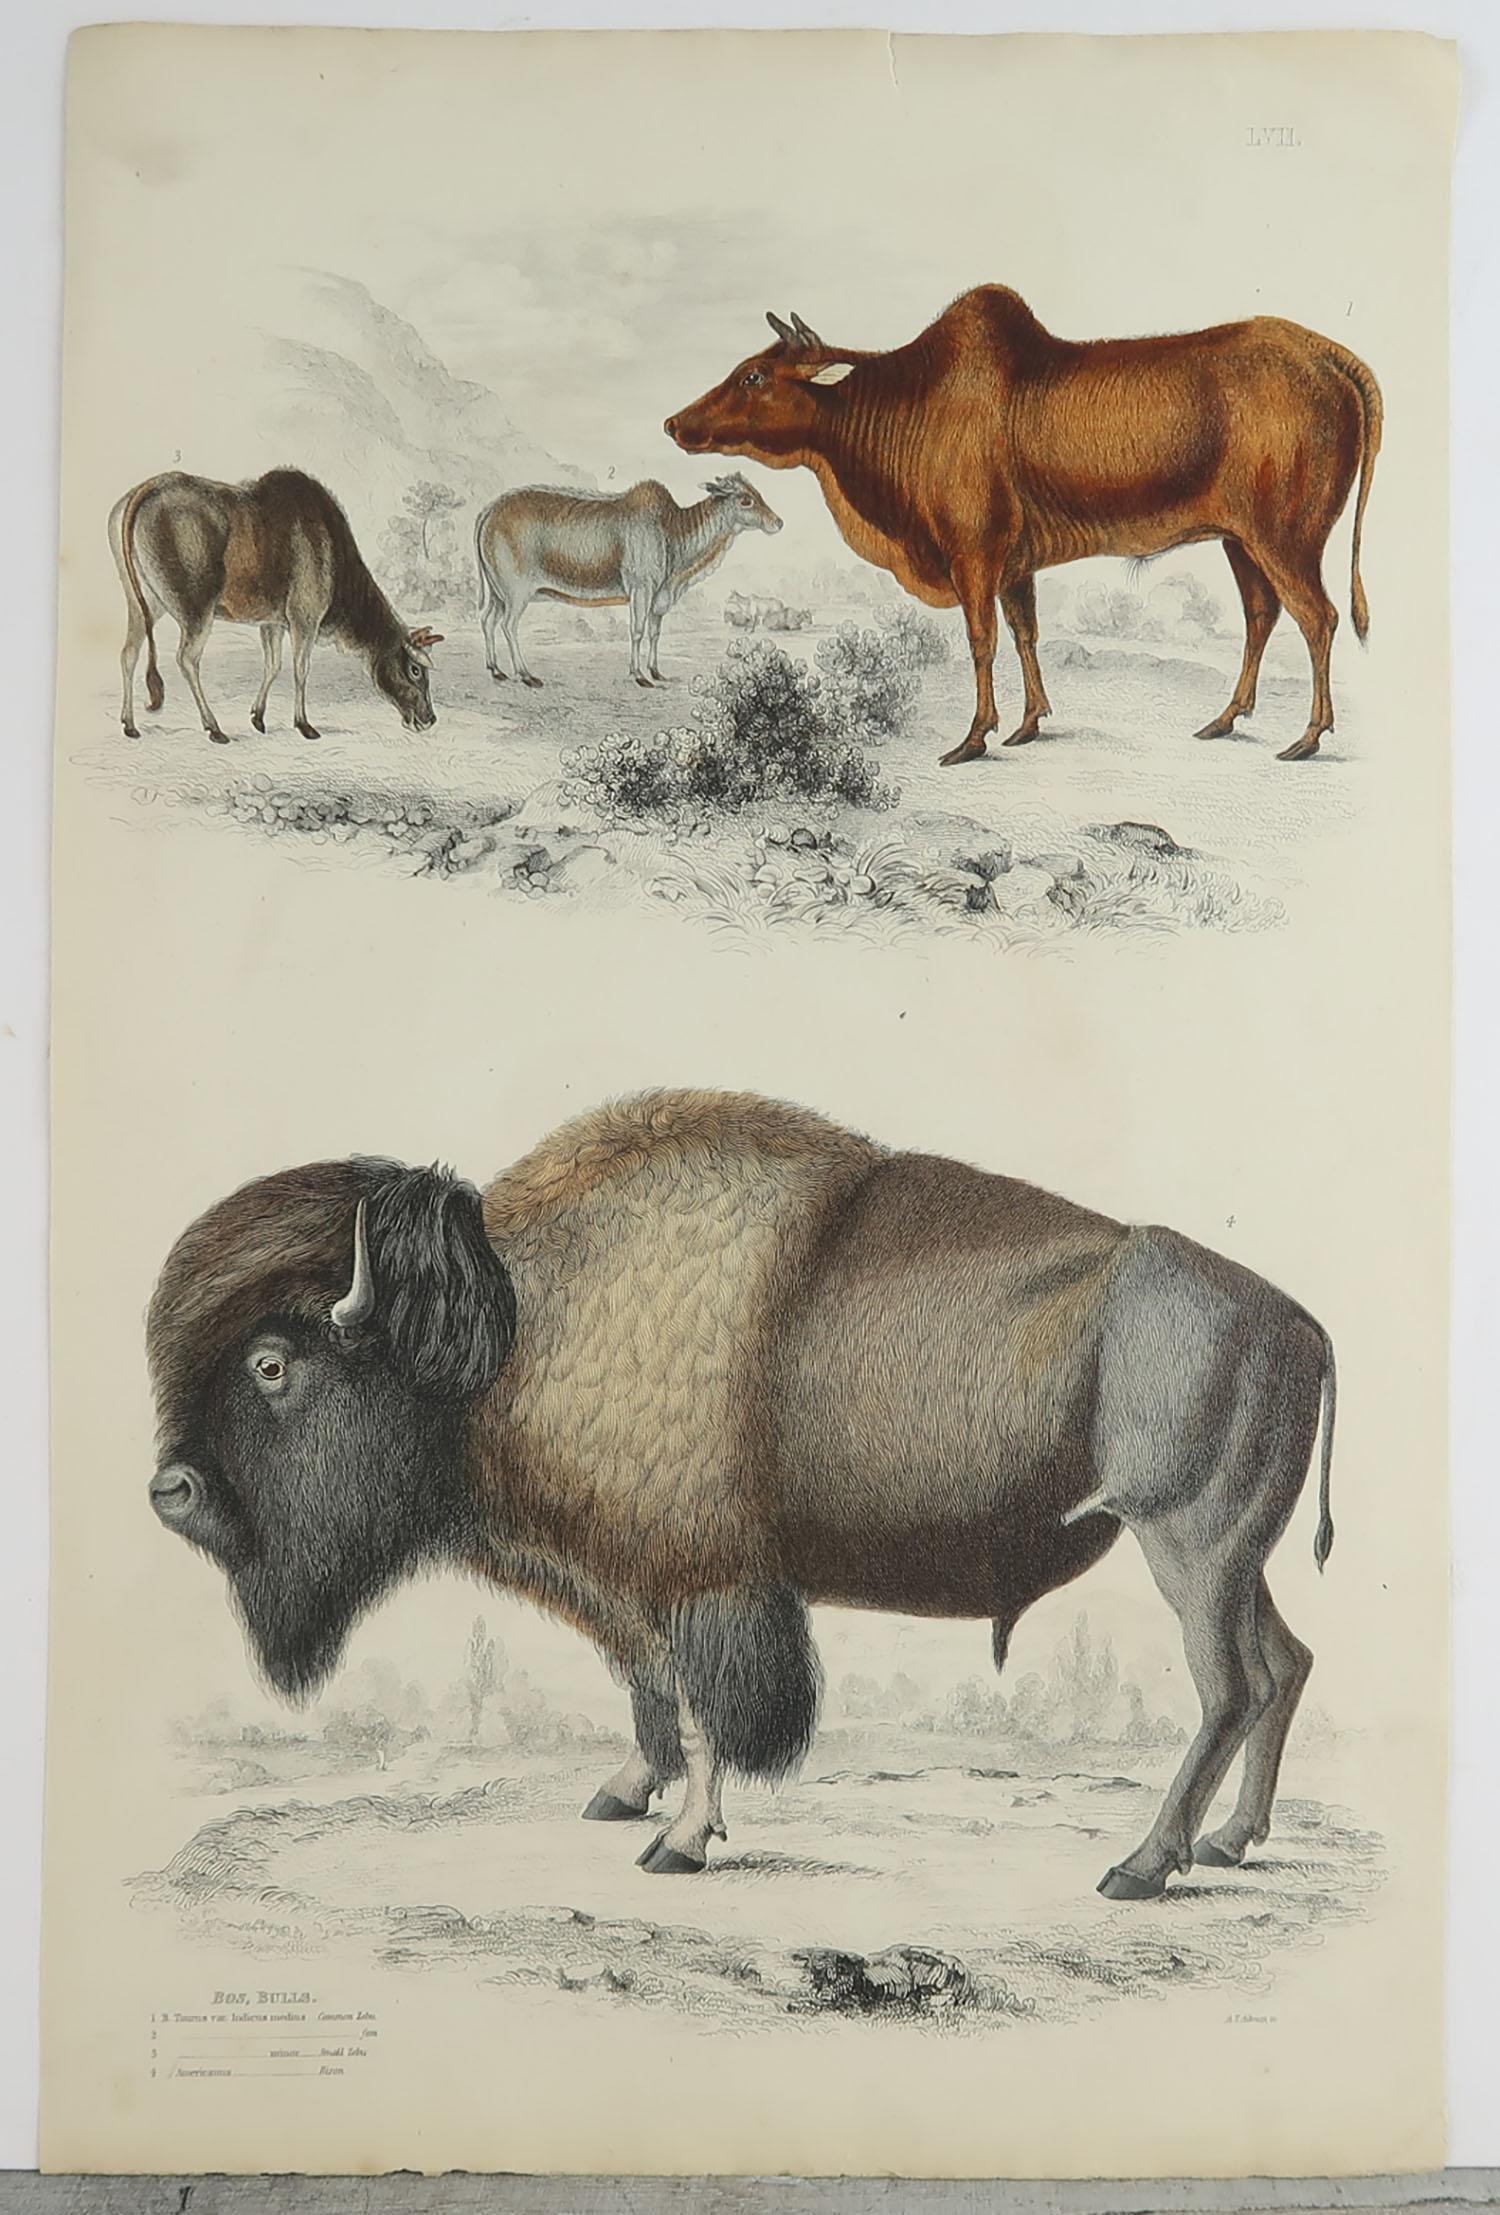 history of bison